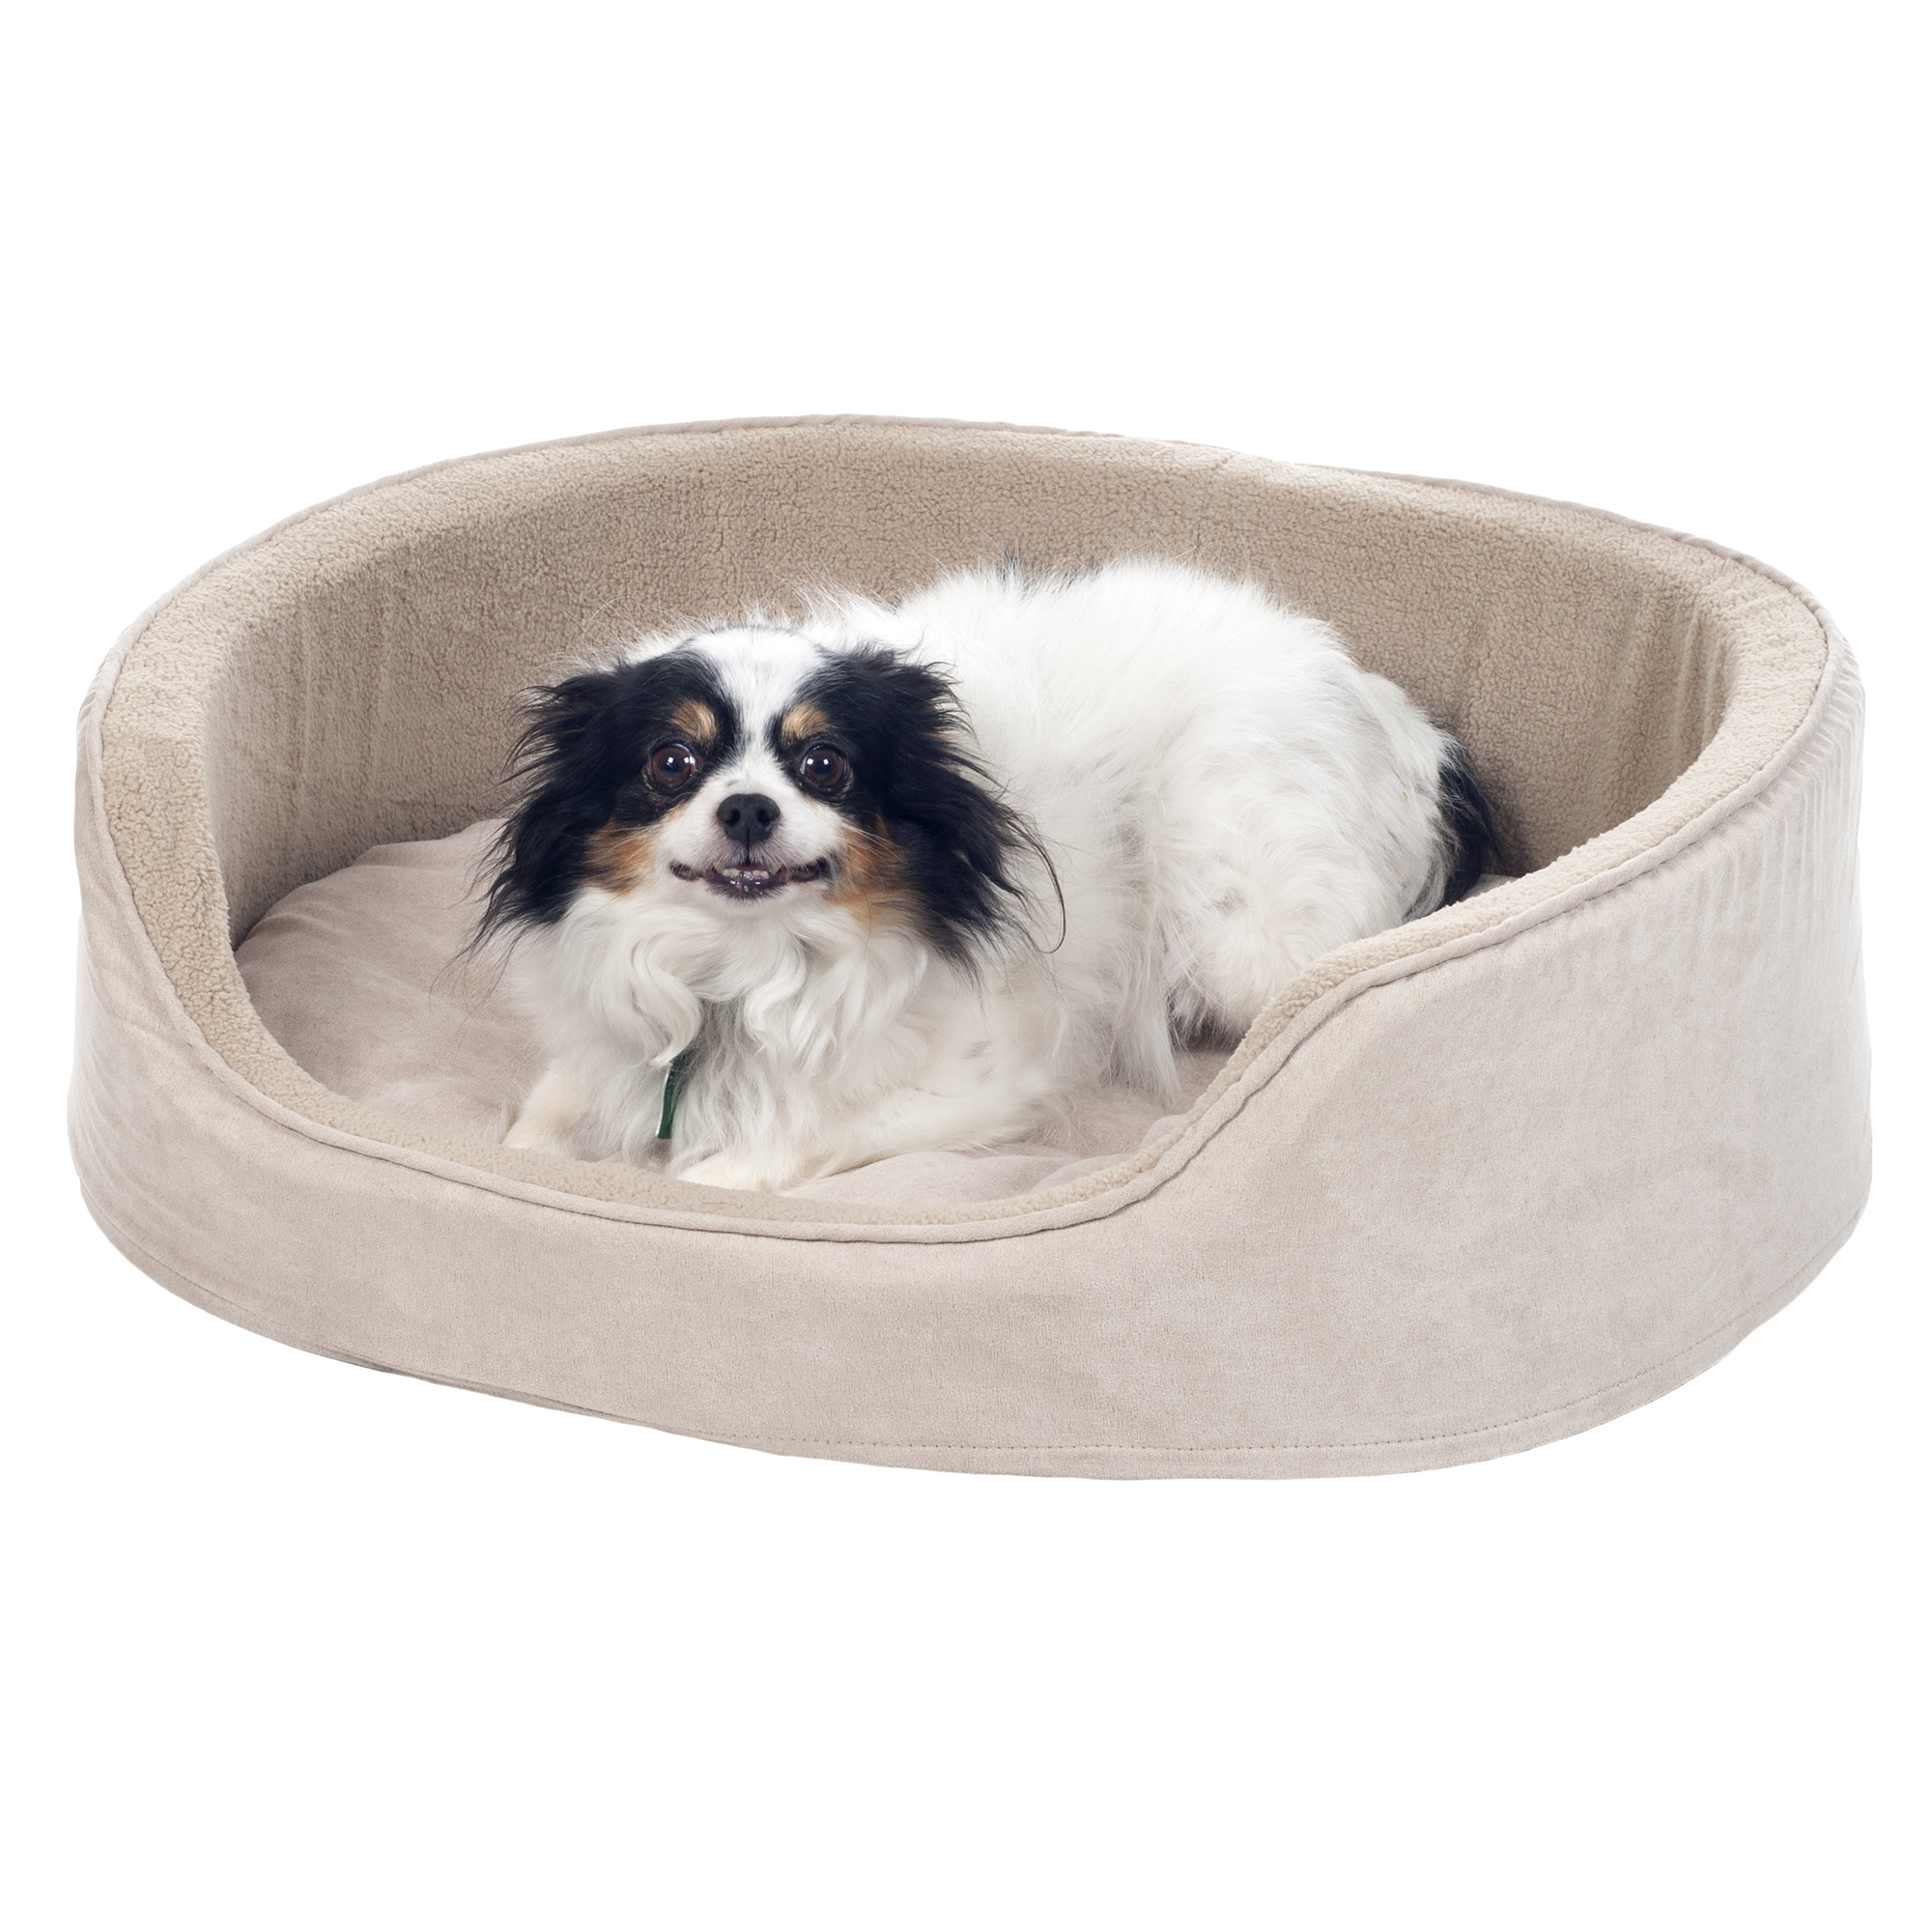 Paw Cuddle Round Suede Terry Pet Bed - Clay - Xlarge